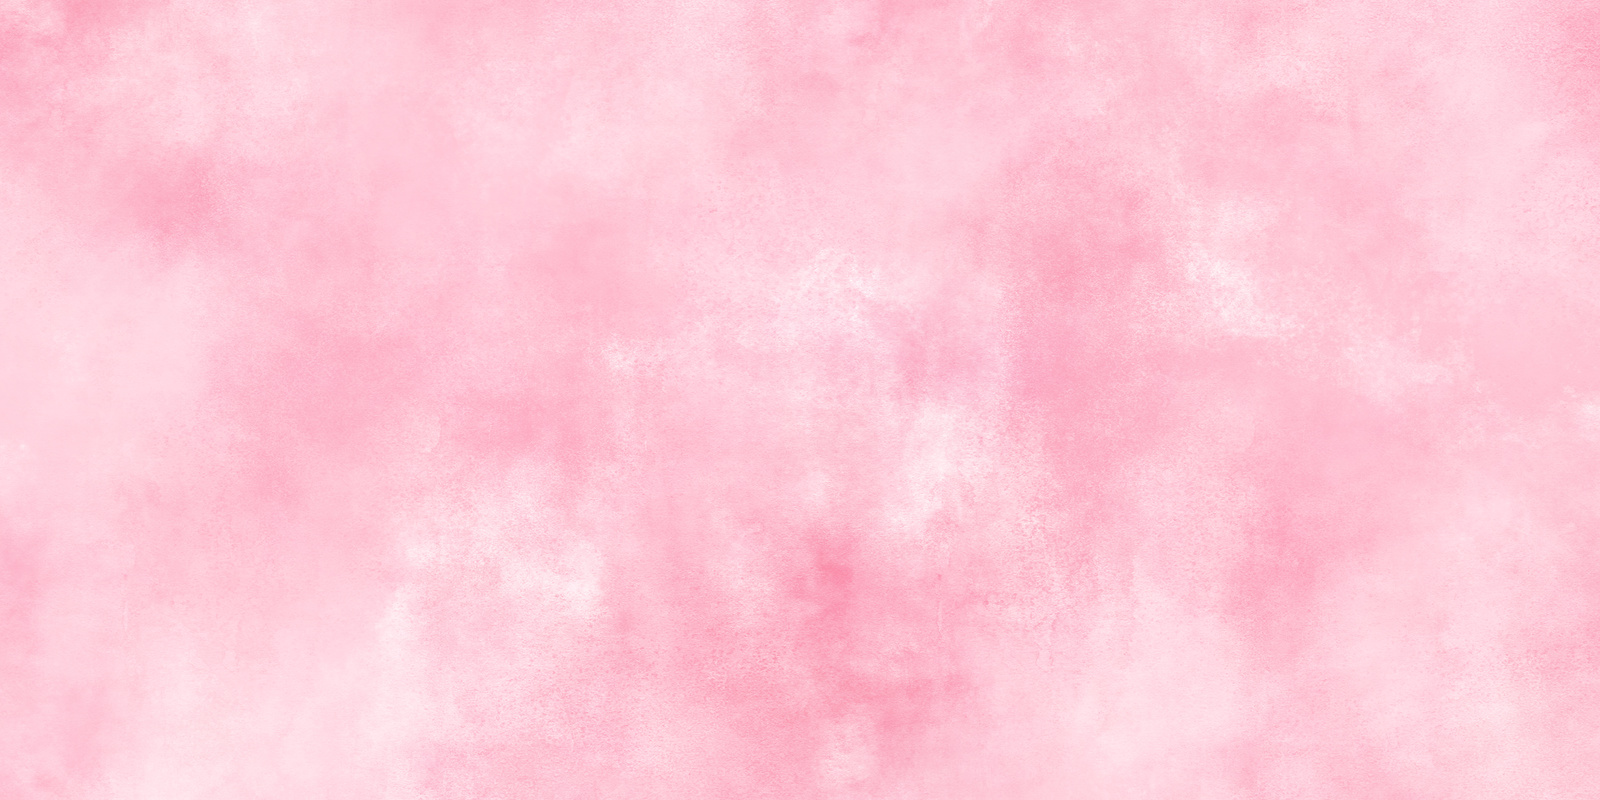 Soft Pink Grunge Watercolor Texture Background